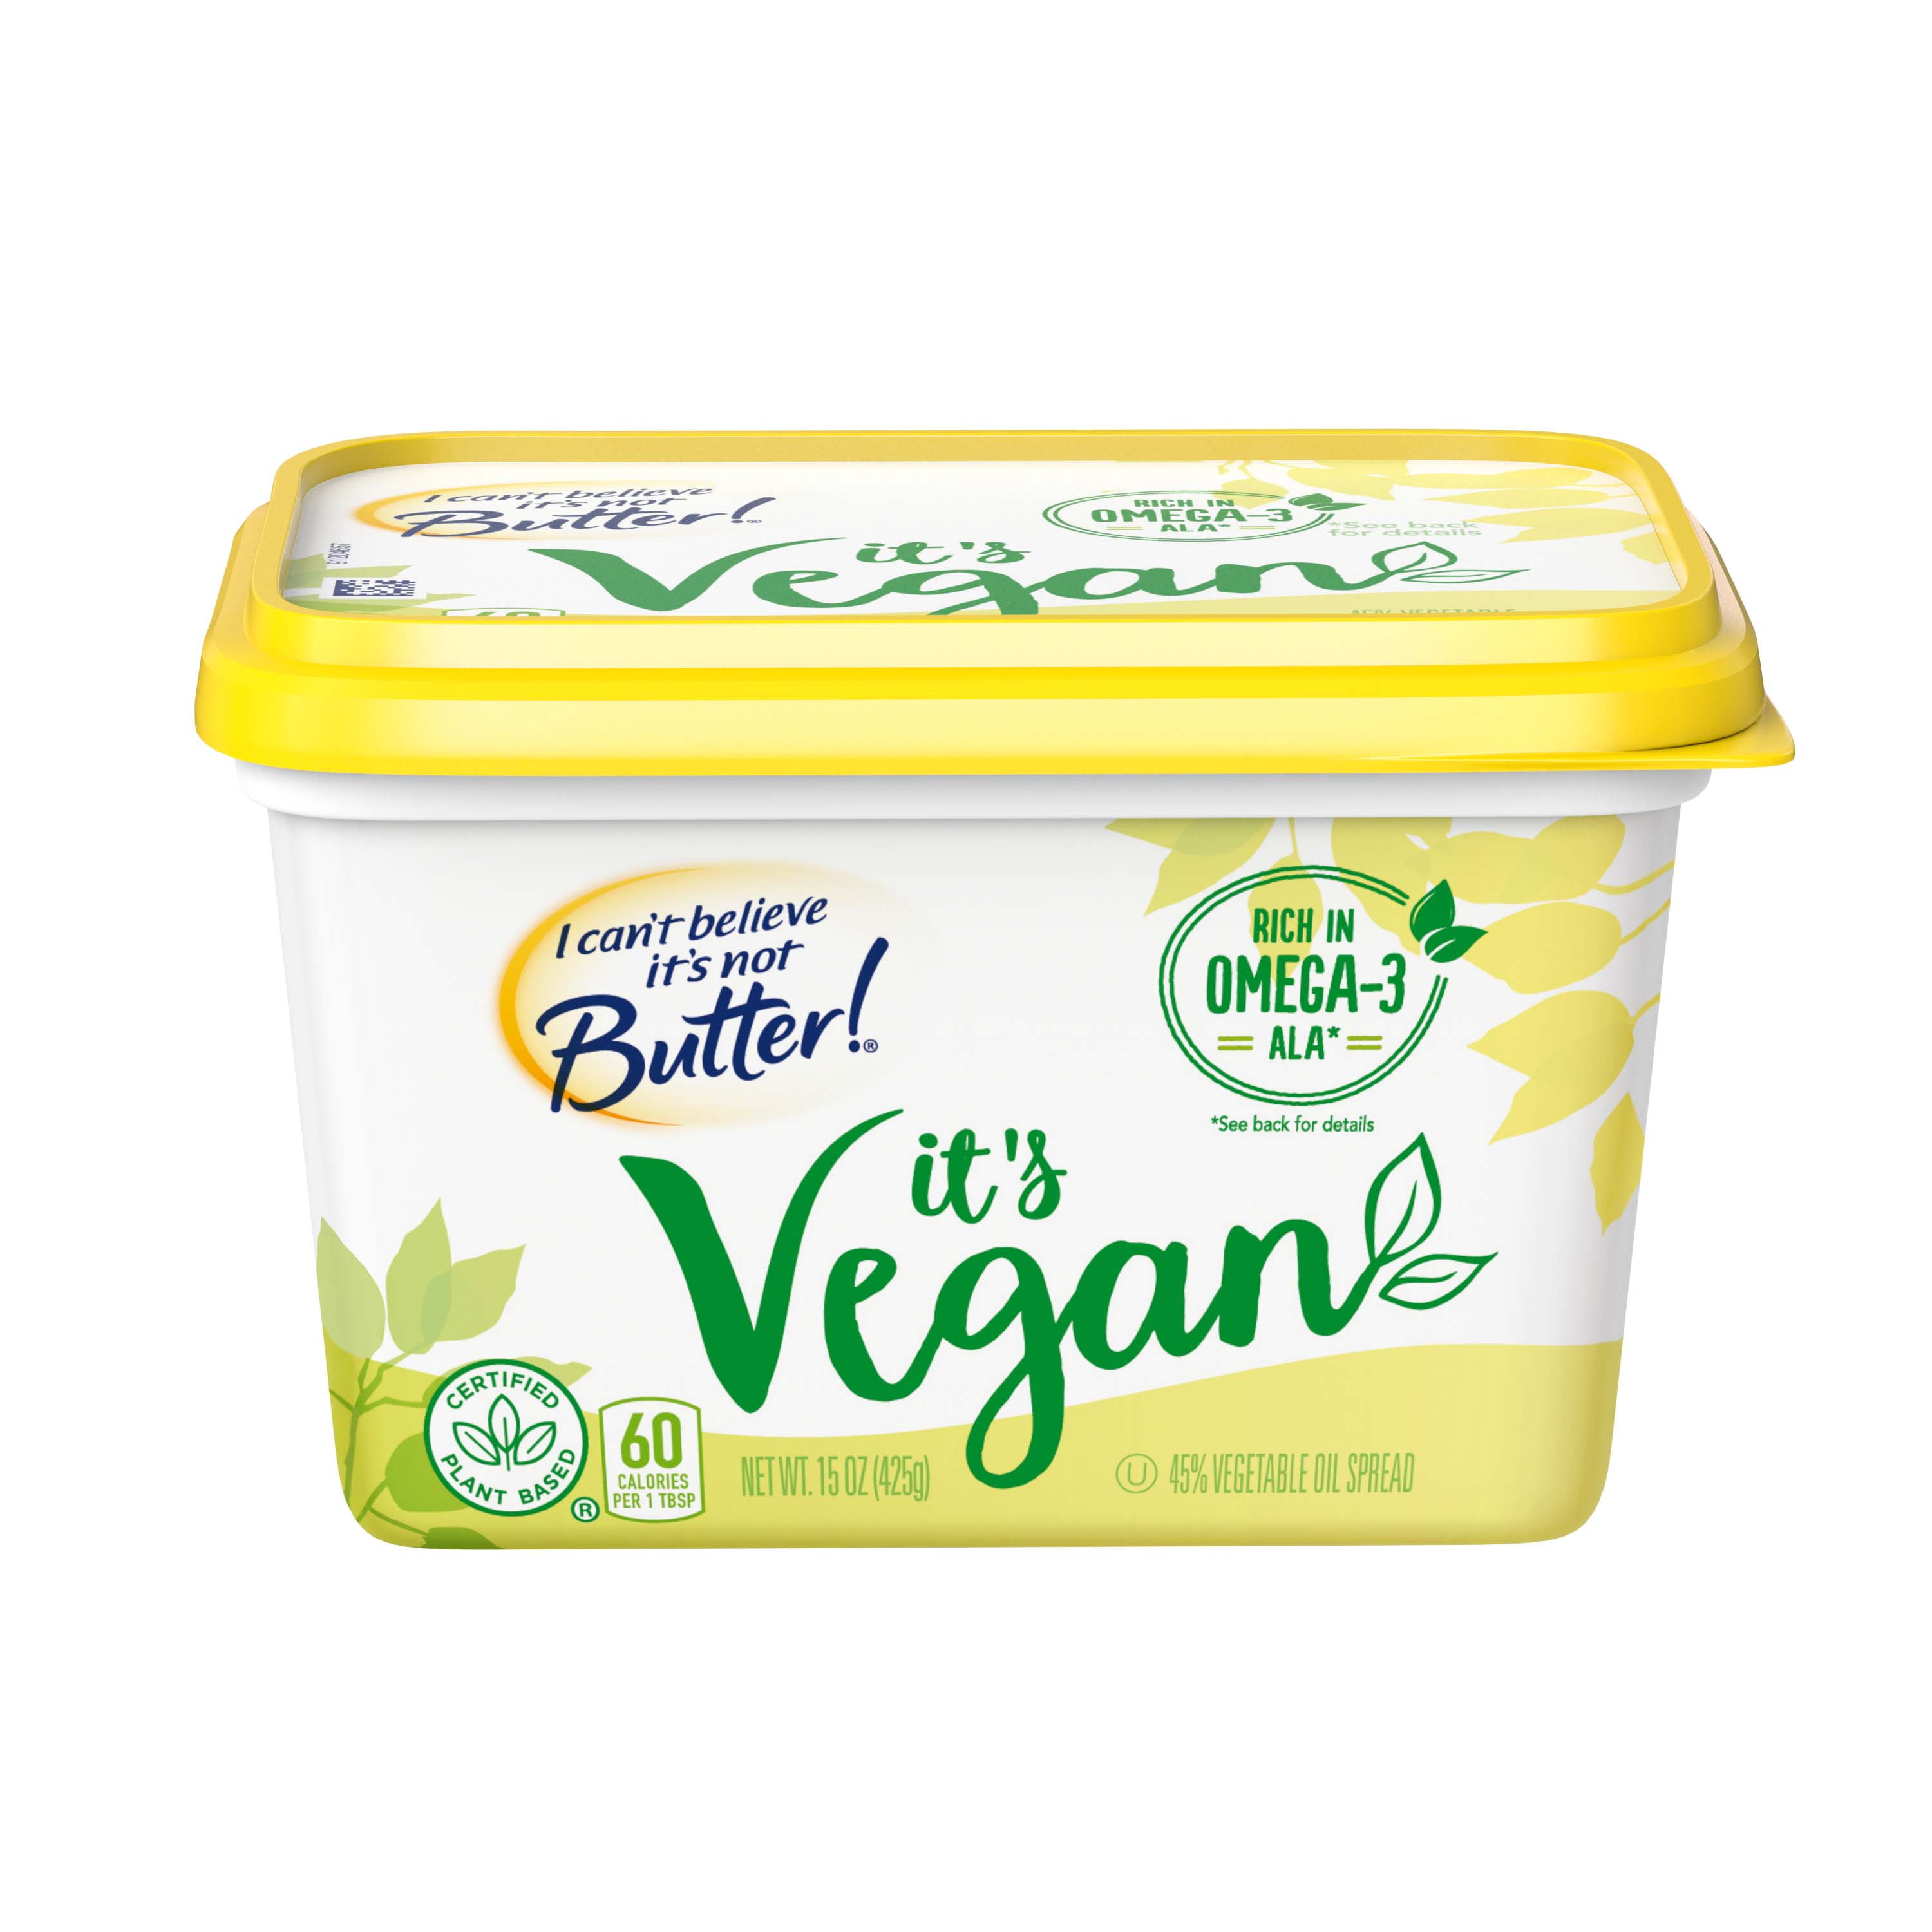 I Can't Believe It's Not Butter Dairy-Free & Vegan Spreads (Review